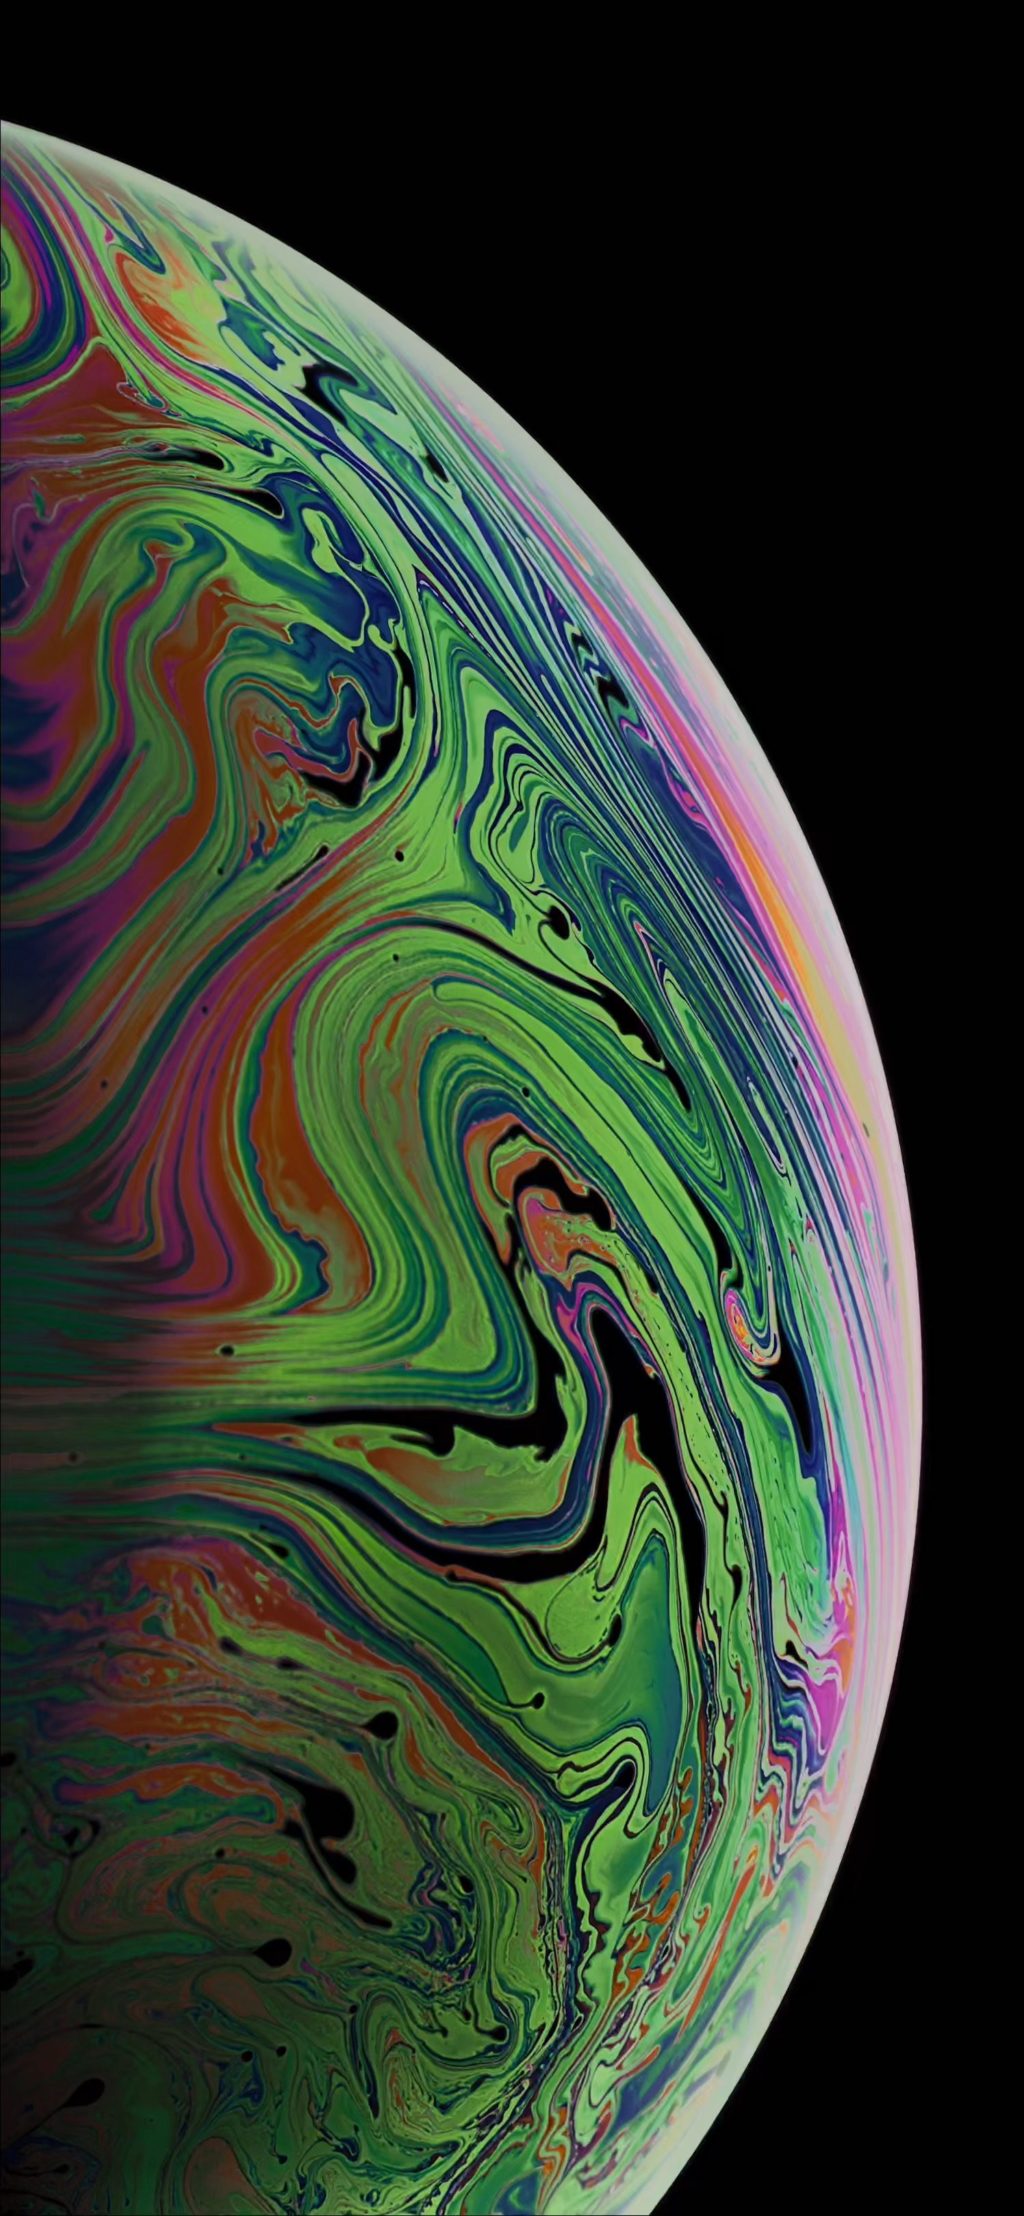 iPhone Xs And Max Wallpaper